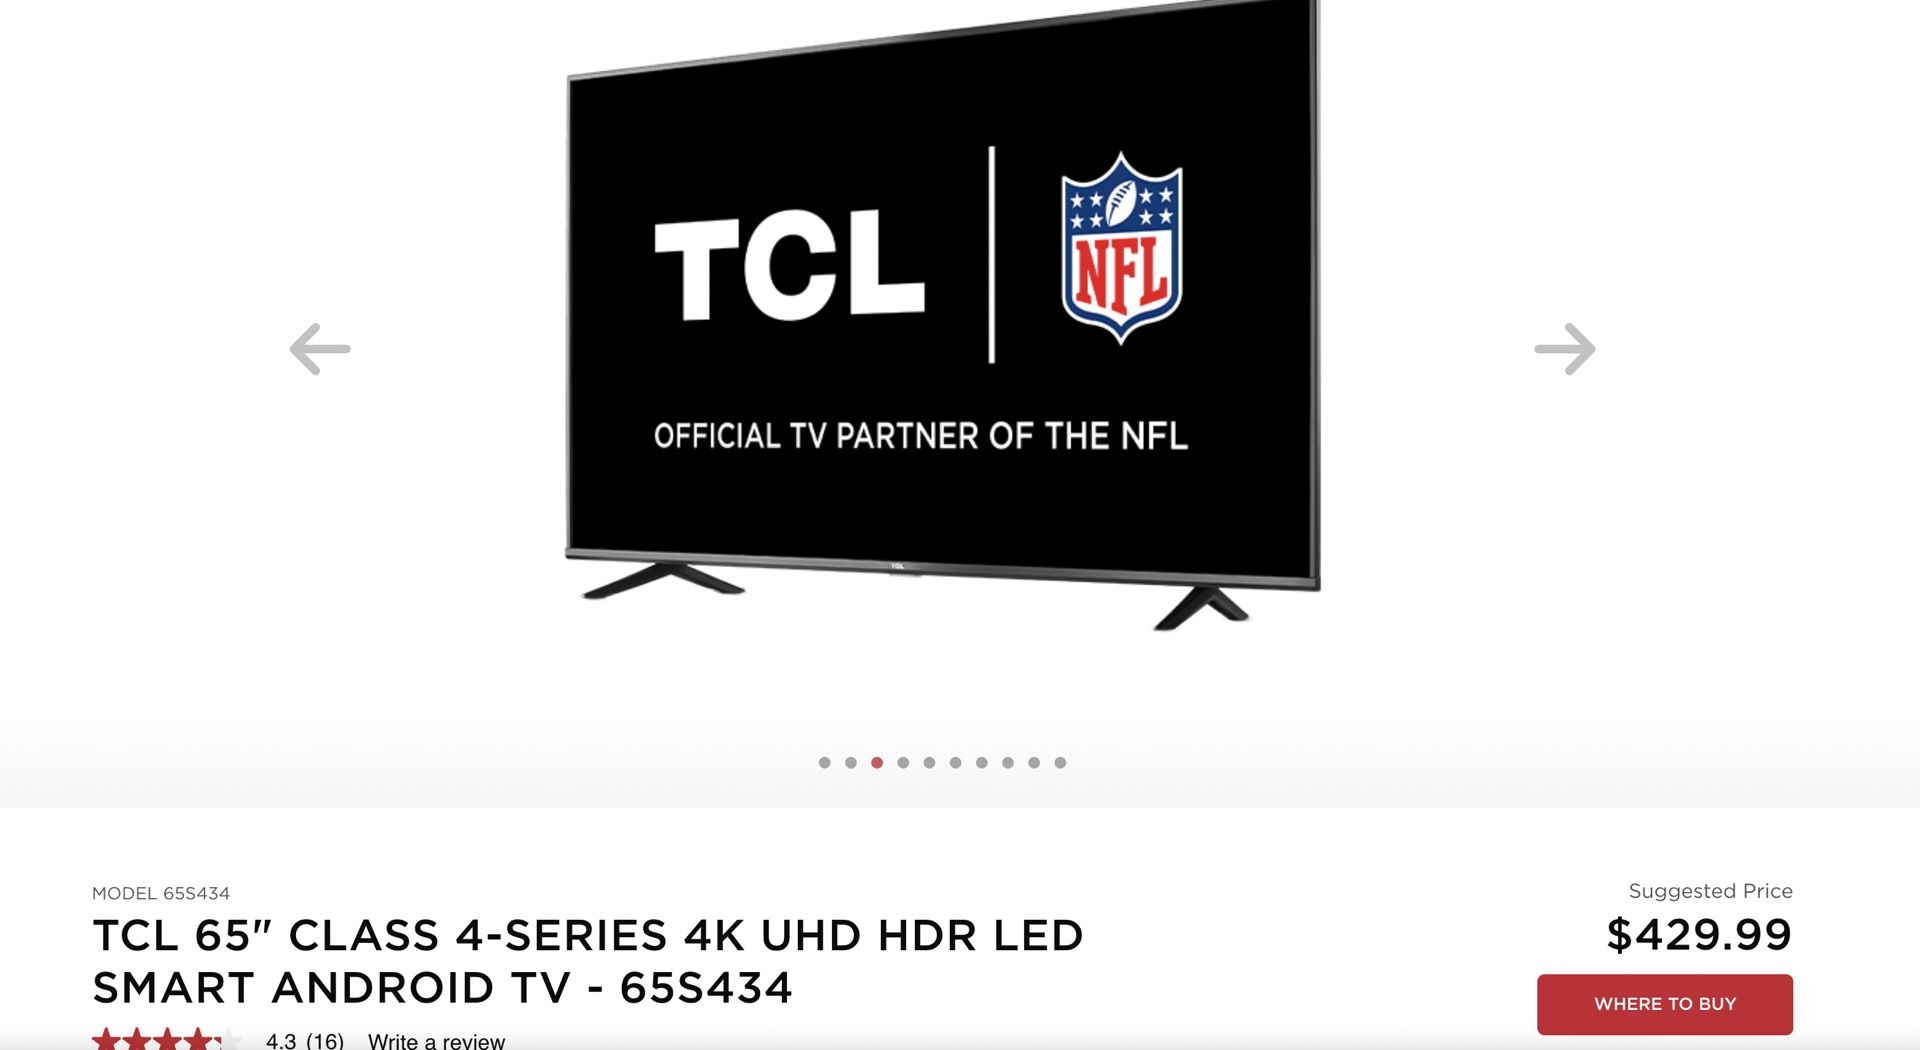 TCL 65 Class 4-Series 4K UHD HDR LED Smart Android TV - 65S434